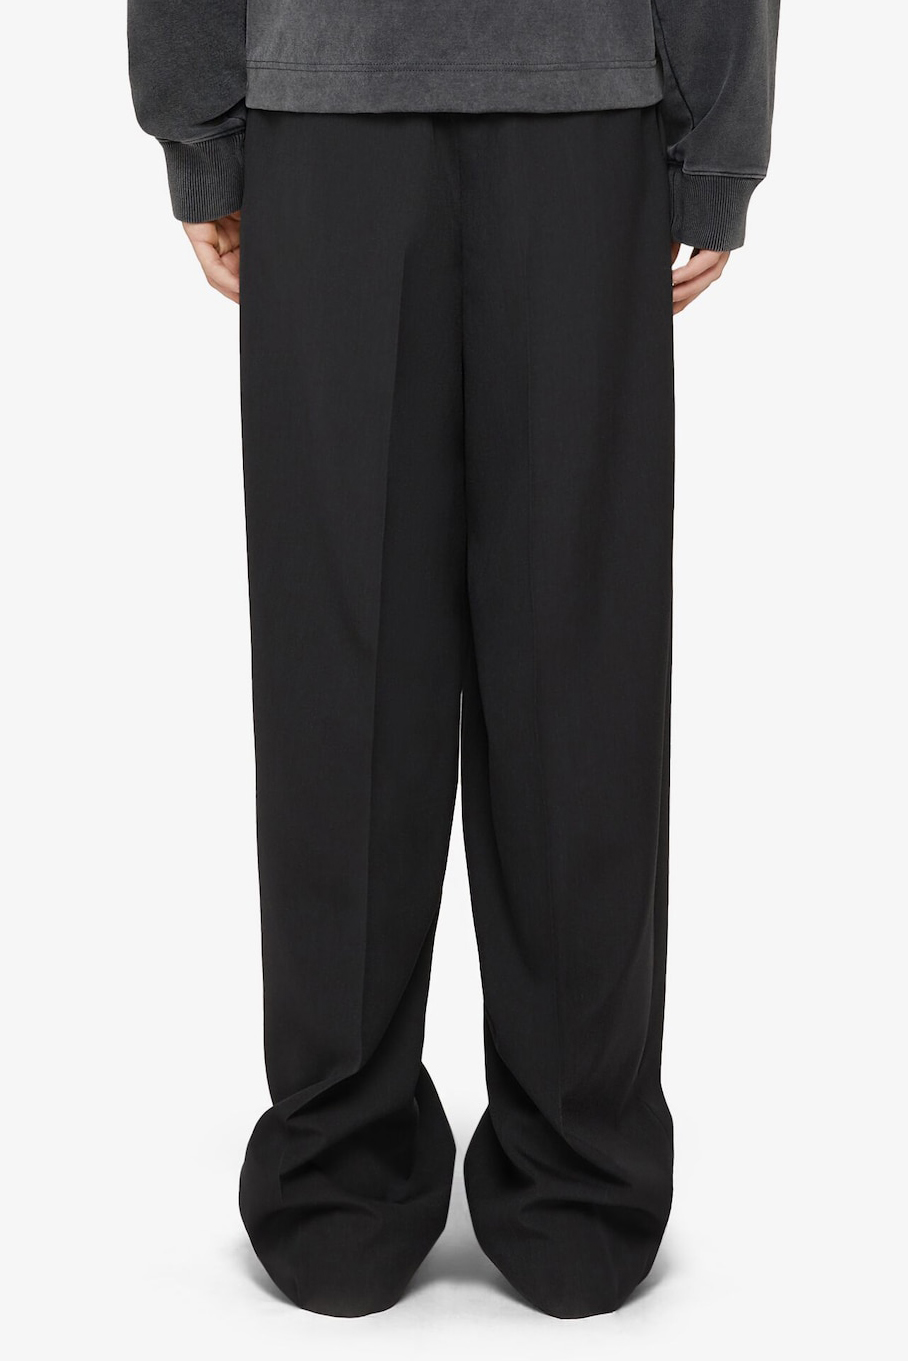 GIVENCHY Oversized Wool Pants, Pants, Jeans & Pants, Clothing, Men